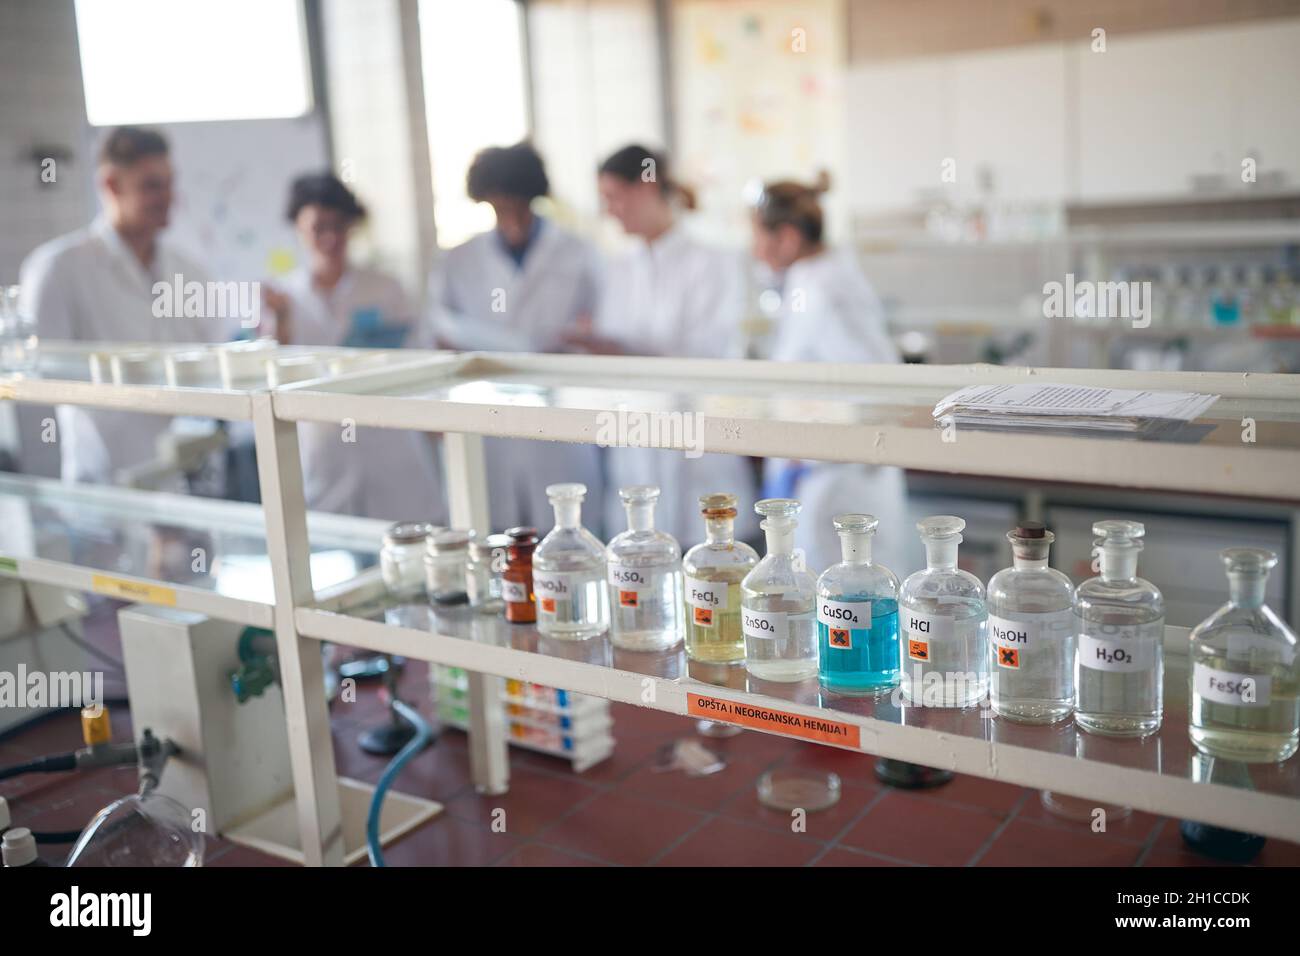 Young chemistry students preparing for a work in a sterile university laboratory environment. Science, chemistry, lab, people Stock Photo